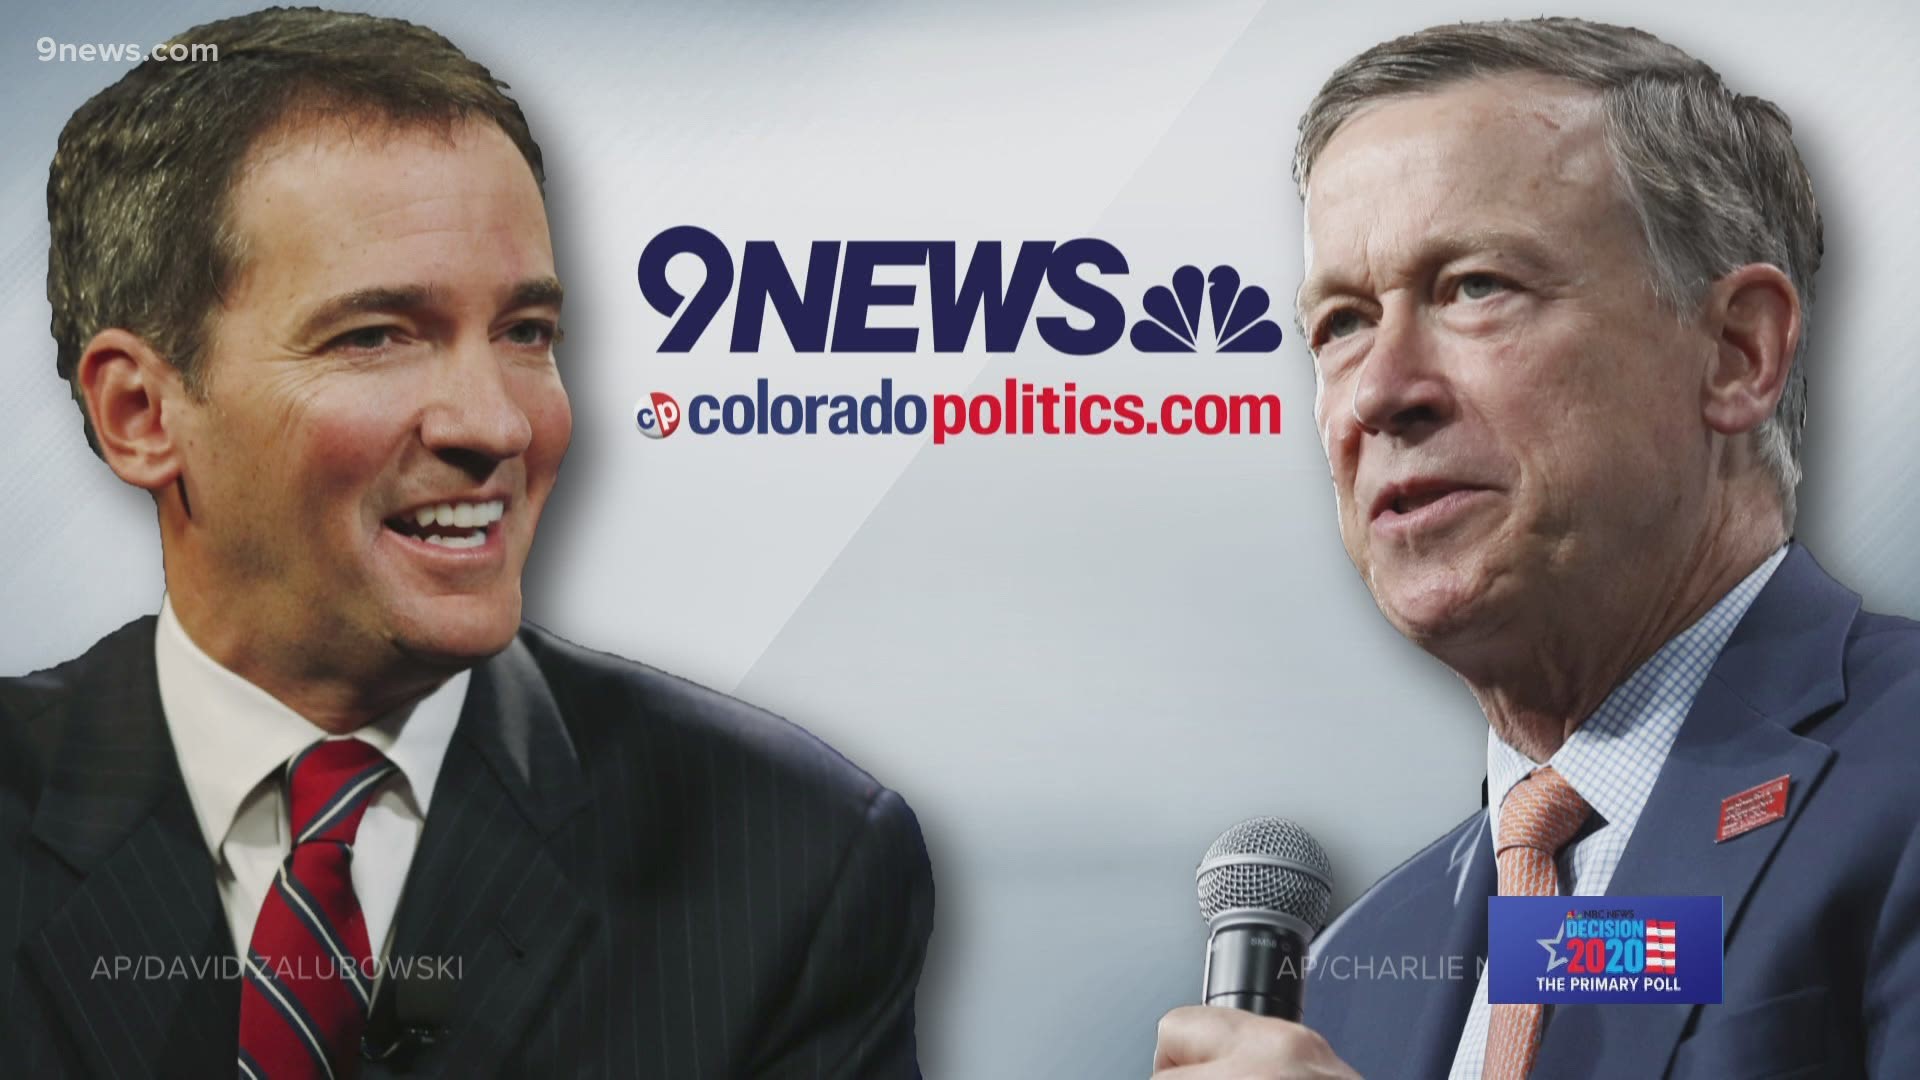 There were more than 30 questions on the poll. The key questioned we wanted to know: Hickenlooper or Romanoff, and who voters think could beat Gardner.